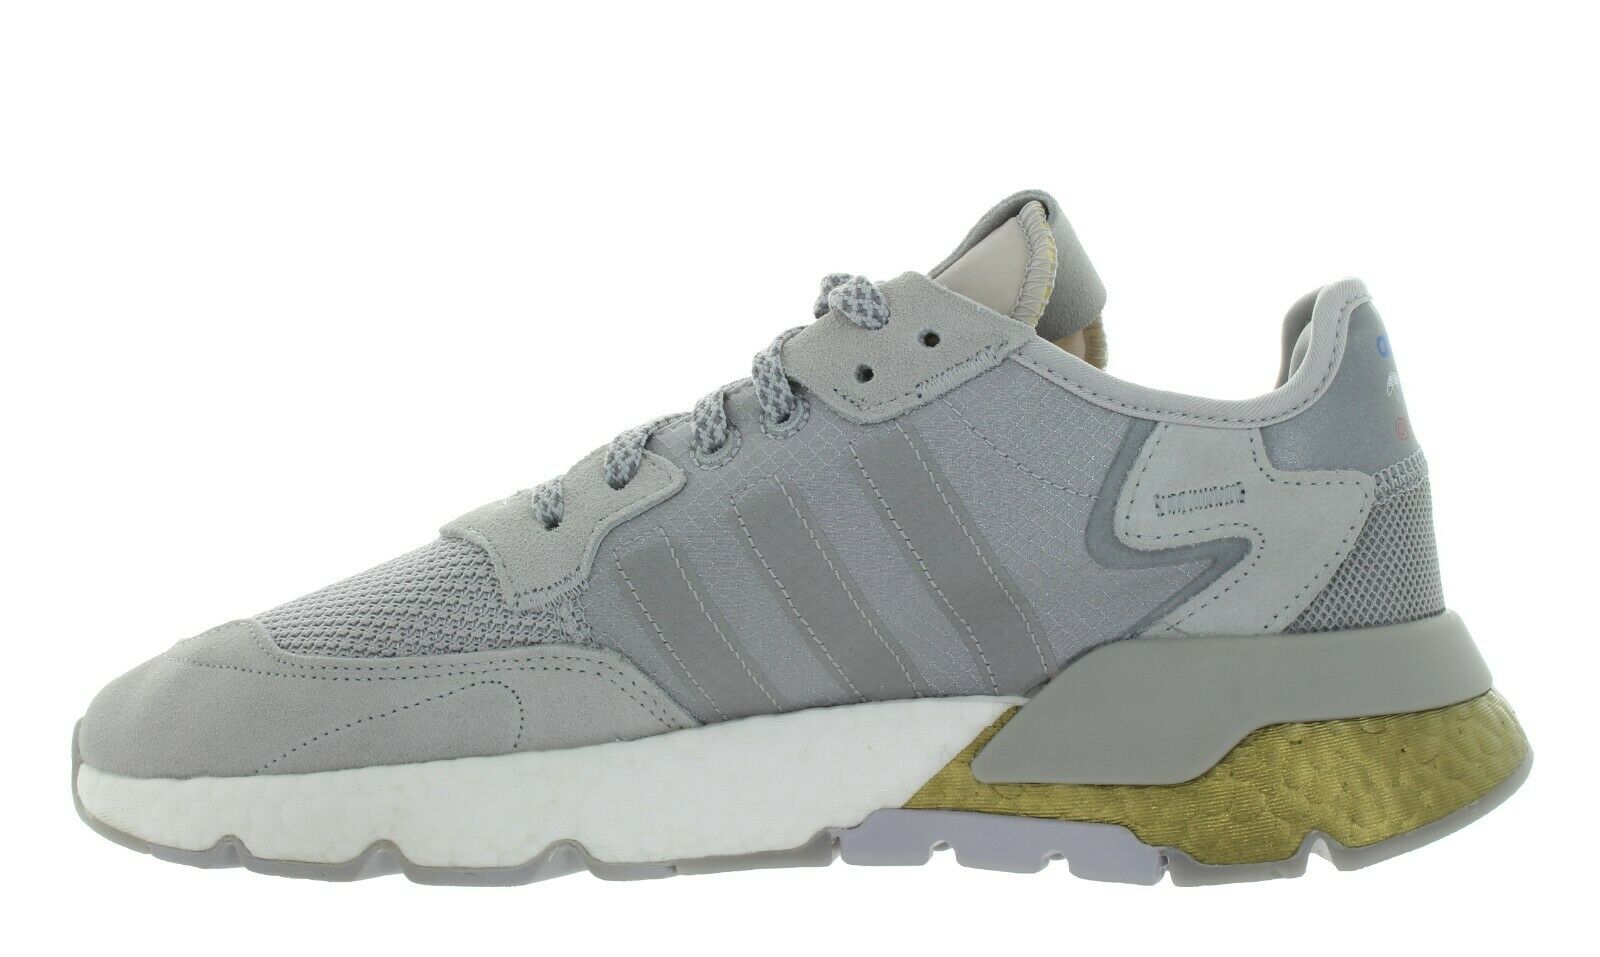 Adidas Men's NITE JOGGER Grey / Gold Metallic Sneakers Shoes Size 11 New